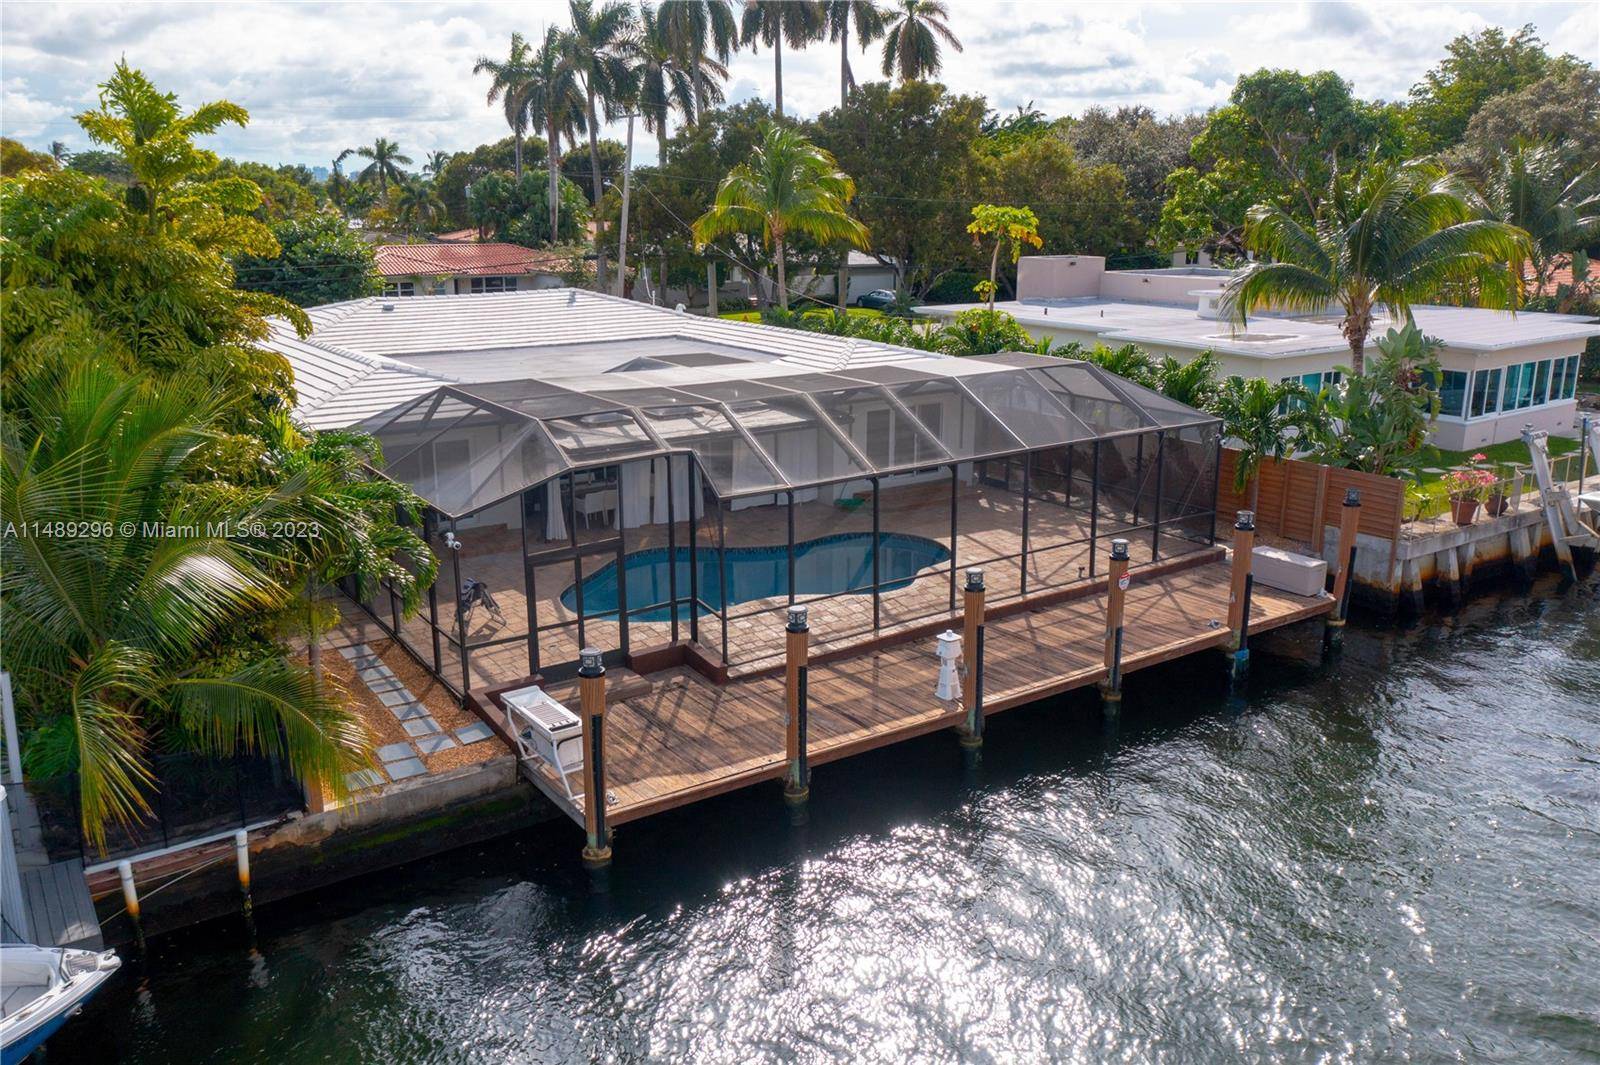 Experience waterfront luxury in Miami Shores with this exceptional remodeled home situated along the canal in the coveted East of Biscayne neighborhood.